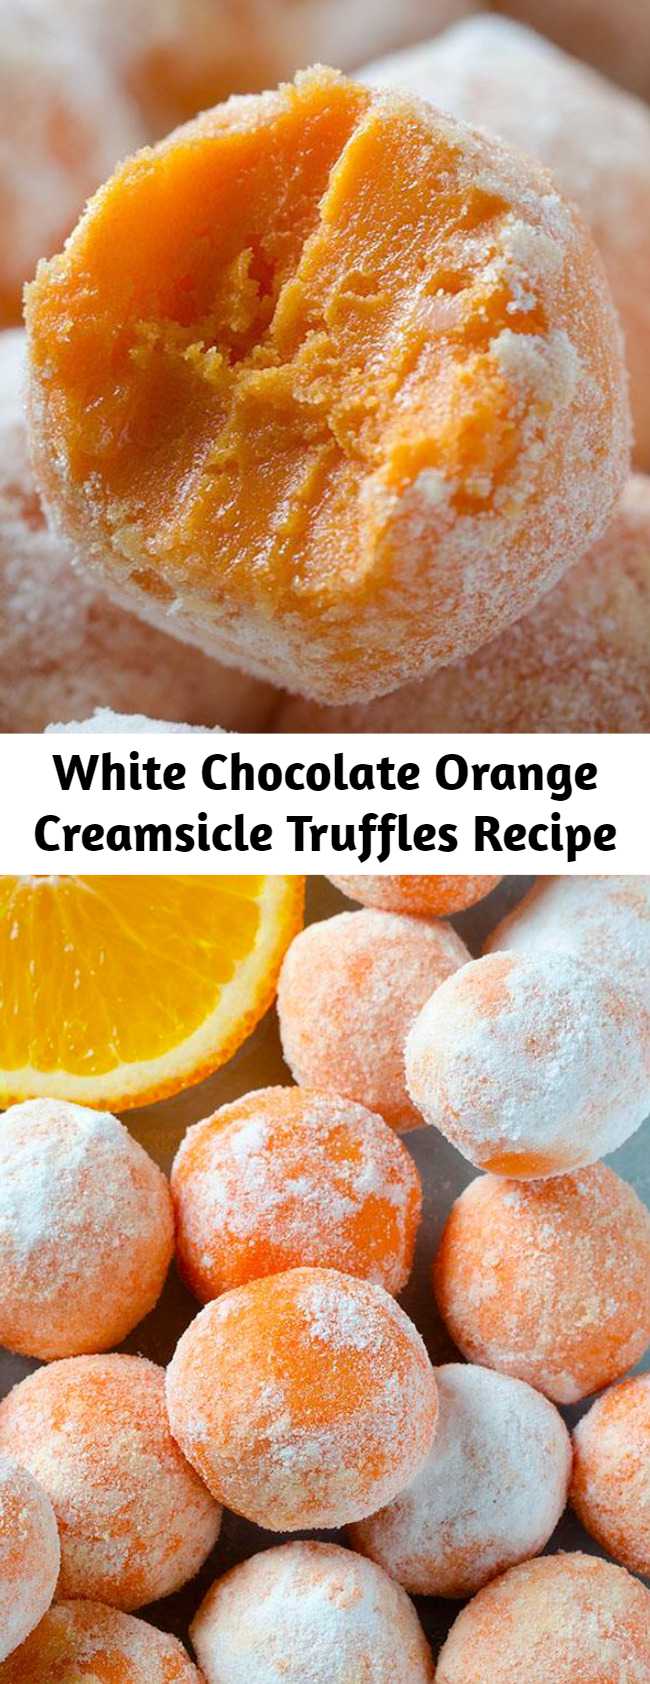 White Chocolate Orange Creamsicle Truffles Recipe - White Chocolate Orange Creamsicle Truffles are perfectly designed for summer, and are a tasty no bake dessert that simply melts in your mouth. This truffle recipe, made with creamy white chocolate, is a big win for orange lovers everywhere!